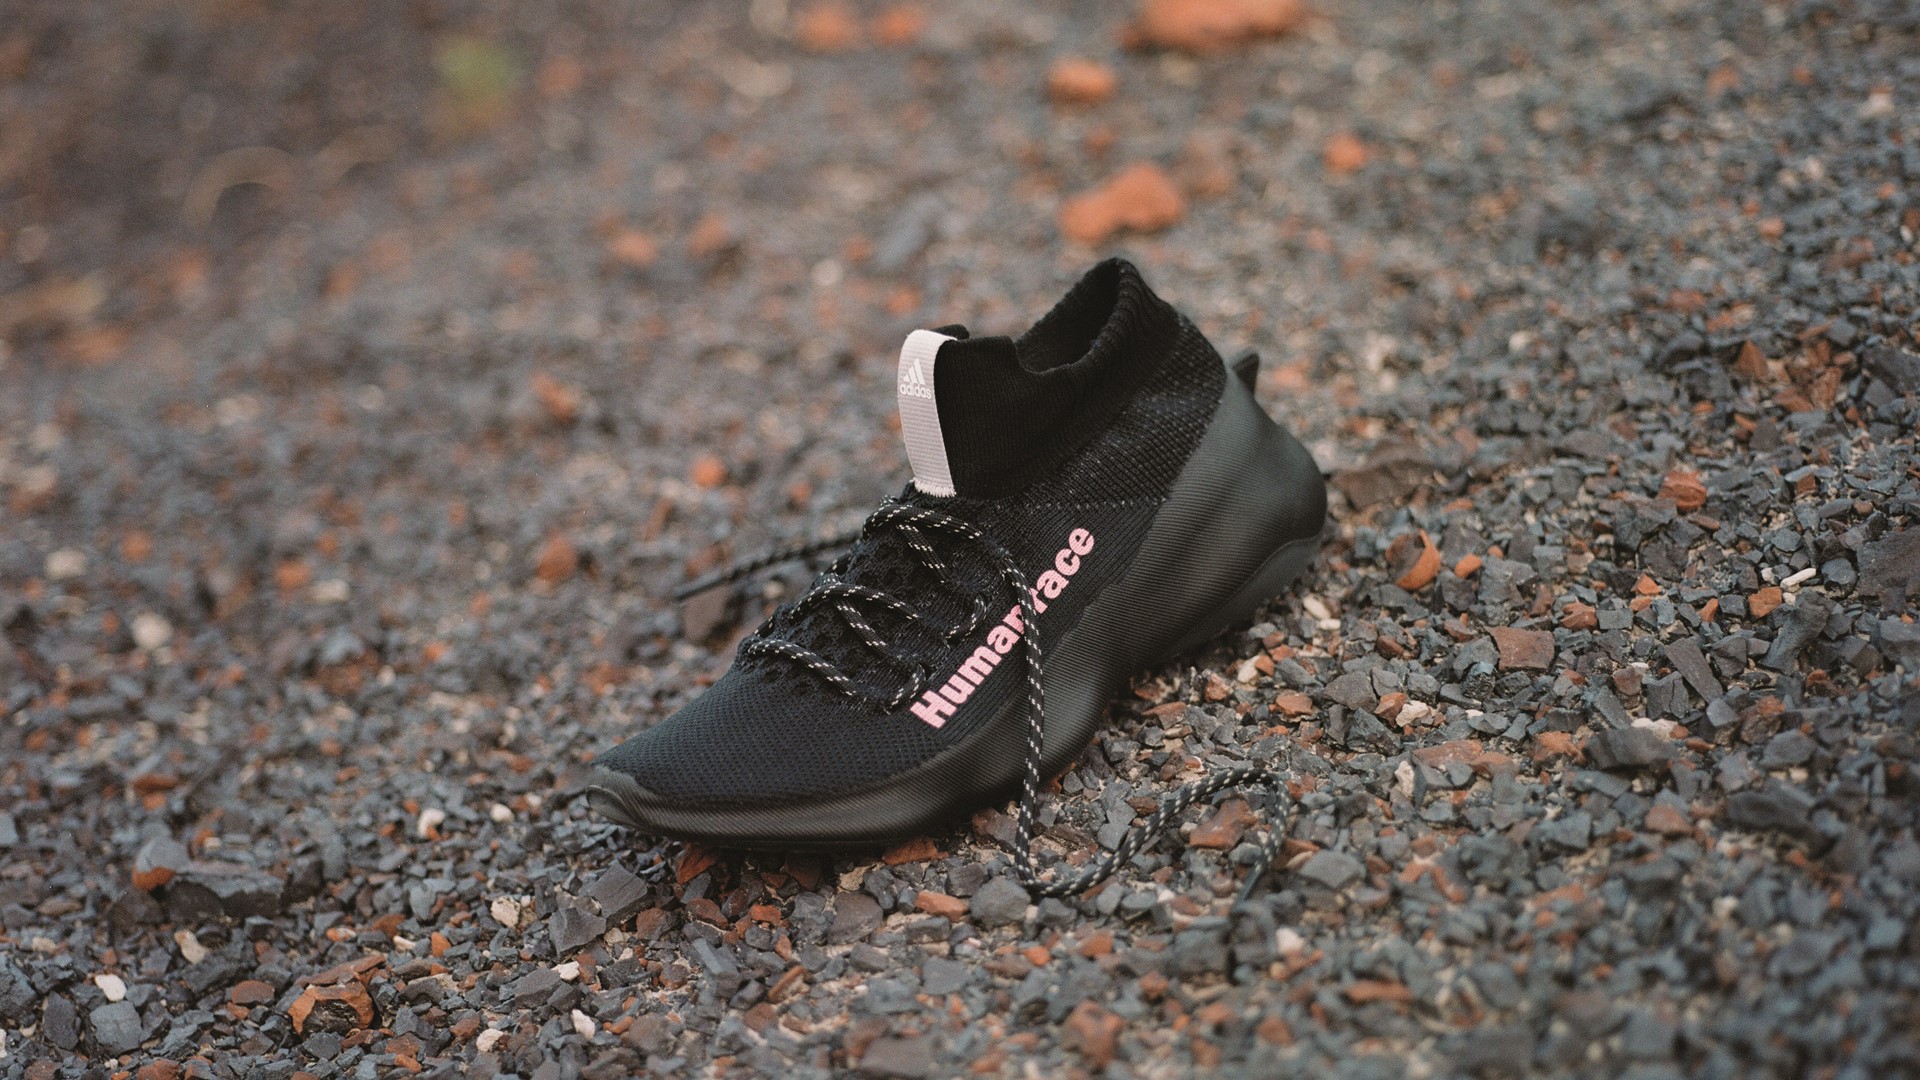 motto punt Susteen adidas and Pharrell Williams Launch New Core Black Colorway of the Humanrace  Sičhona Silhouette